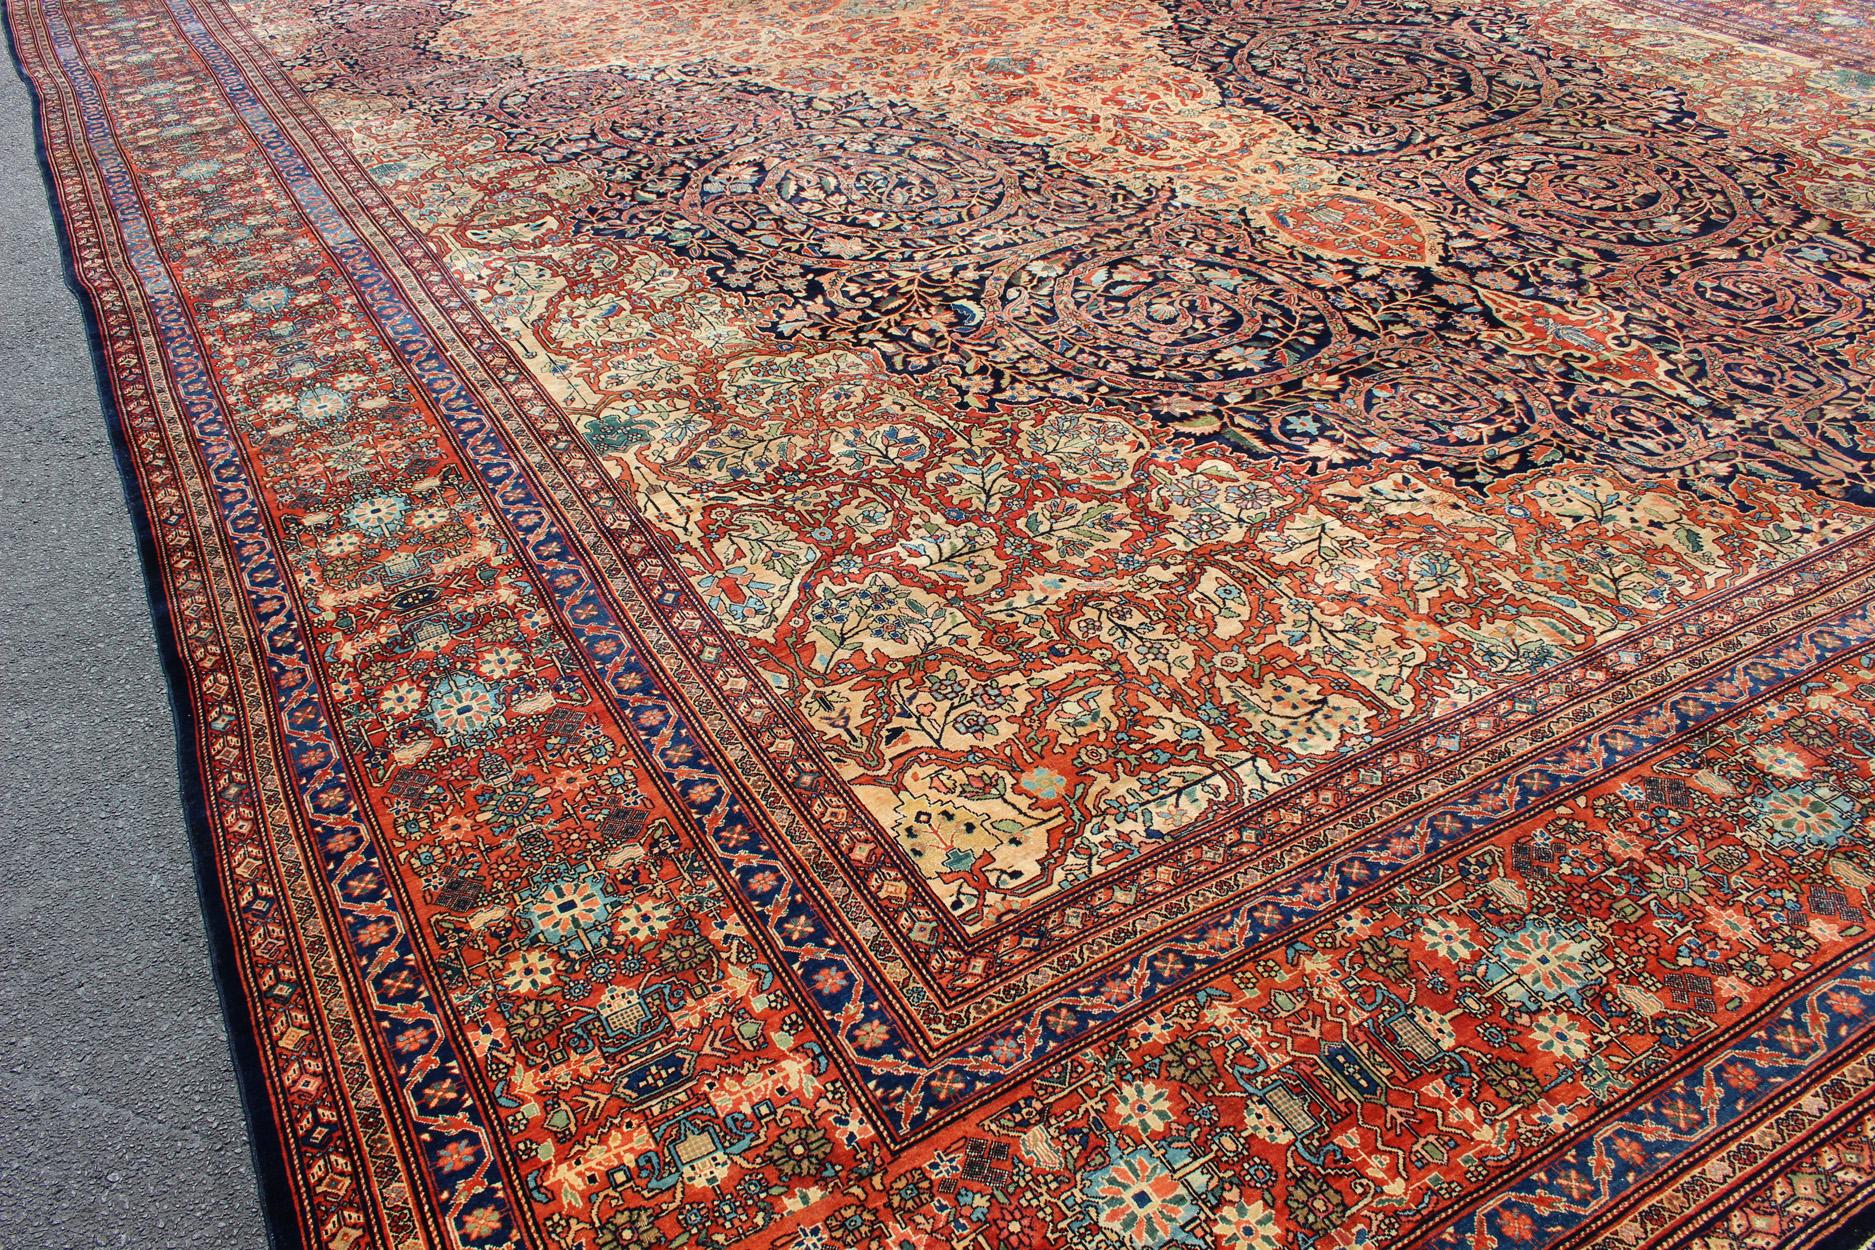 Palace-Sized  Extremely Finely Woven Antique Sarouk-Farahan Persian Rug  In Excellent Condition For Sale In Atlanta, GA